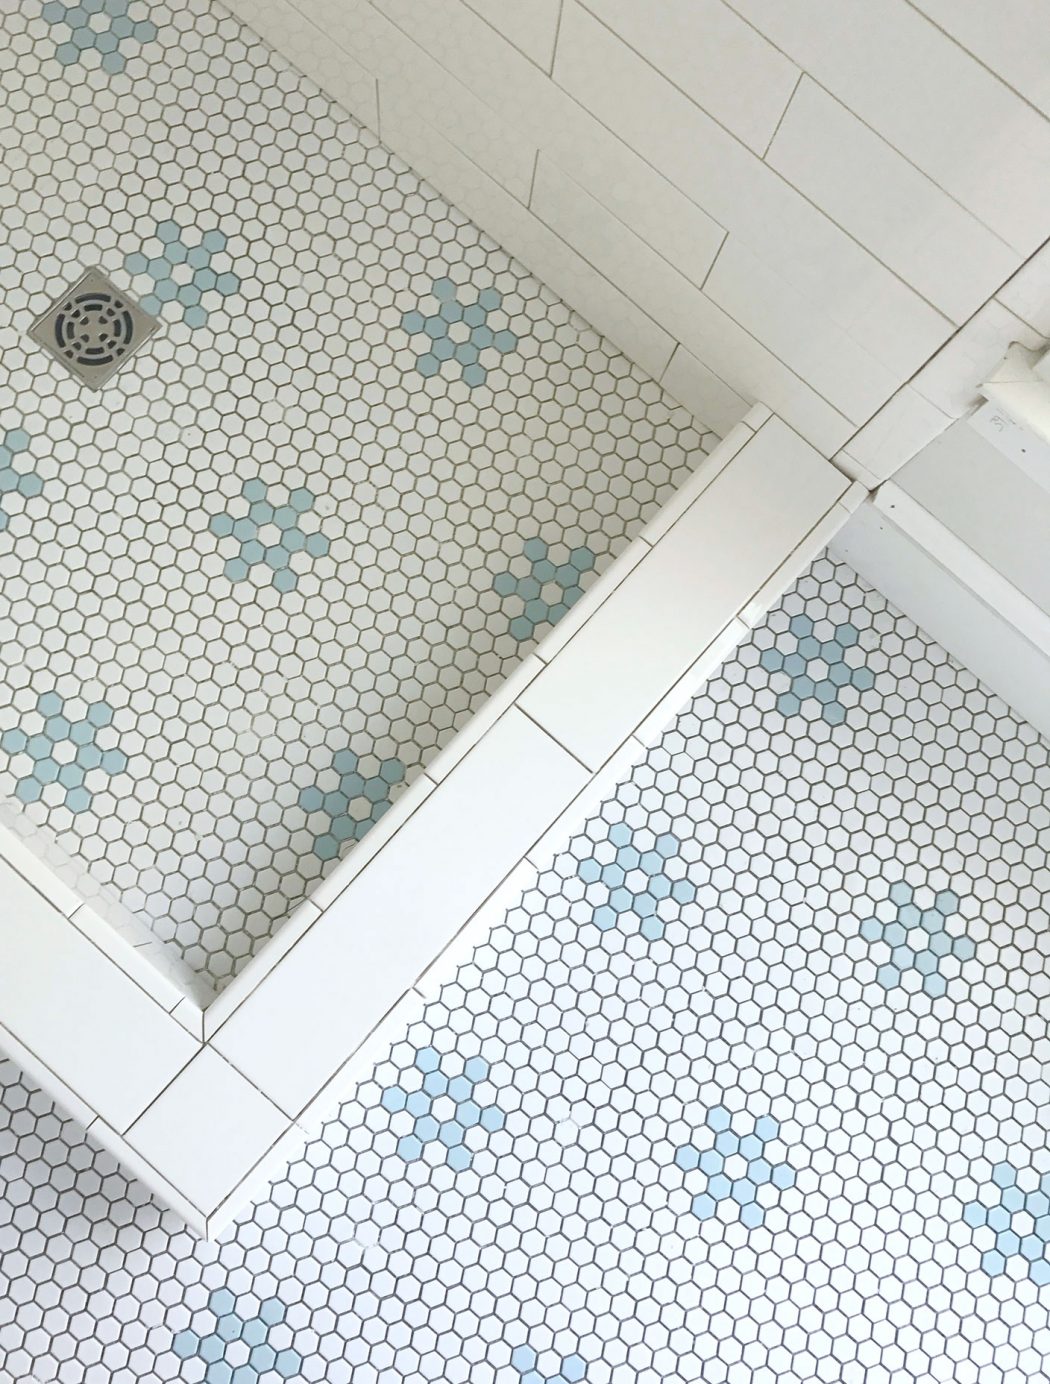 HOLY THINSET, BATMAN The Beach House Bathrooms Are Tiled   Young ...